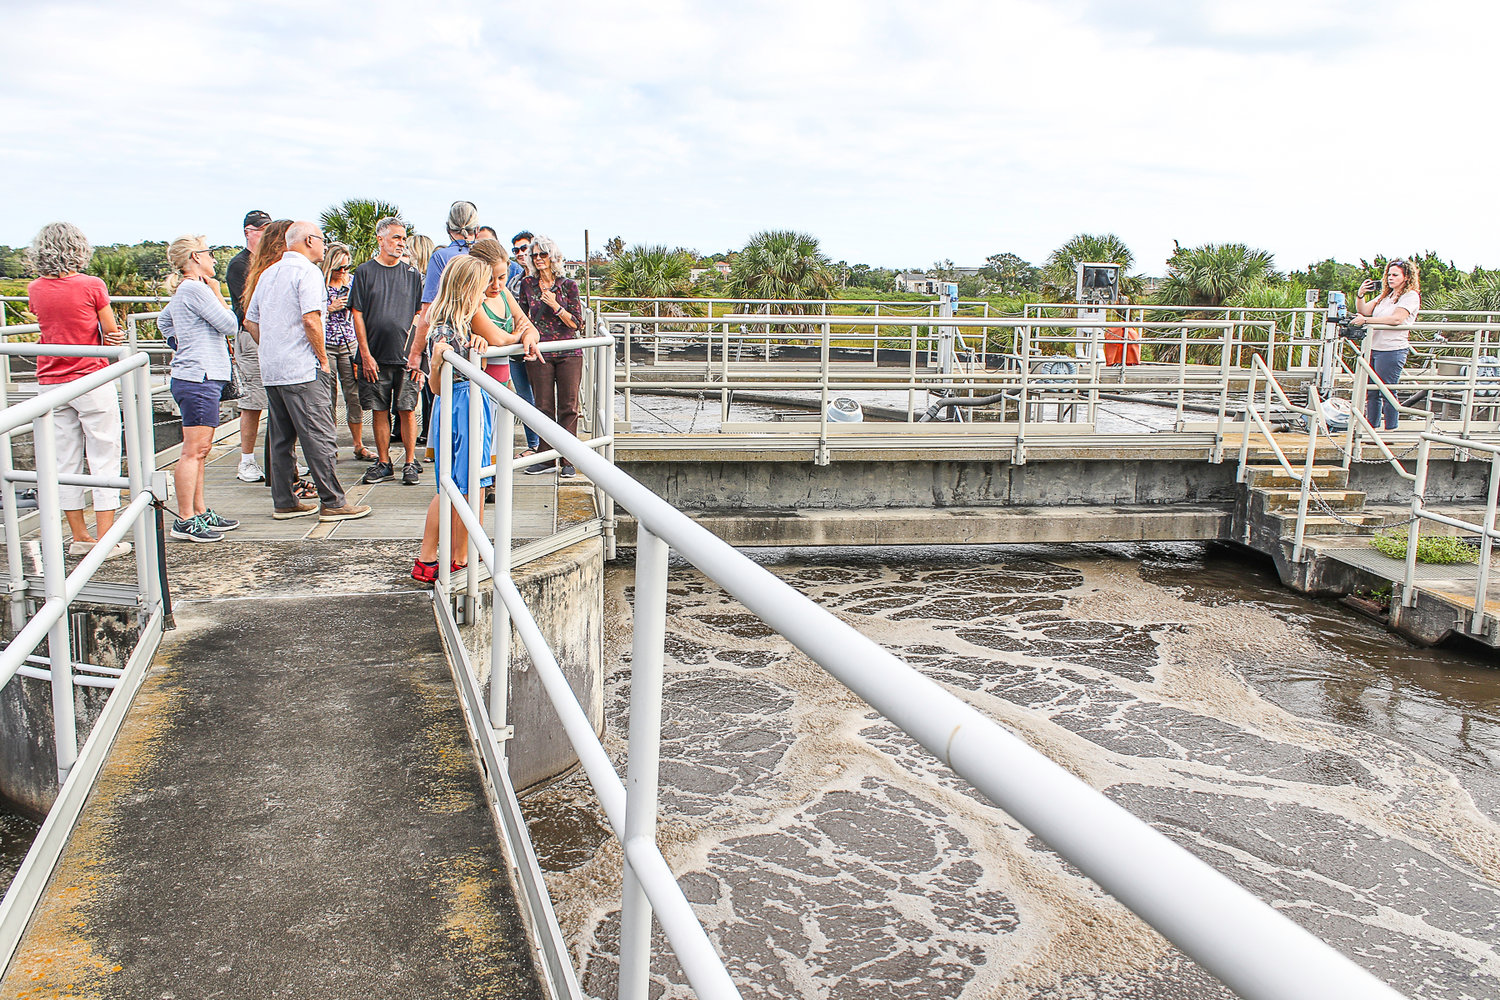 The waste water treatment plant tour allowed guests to walk over the tanks of untreated sewage.